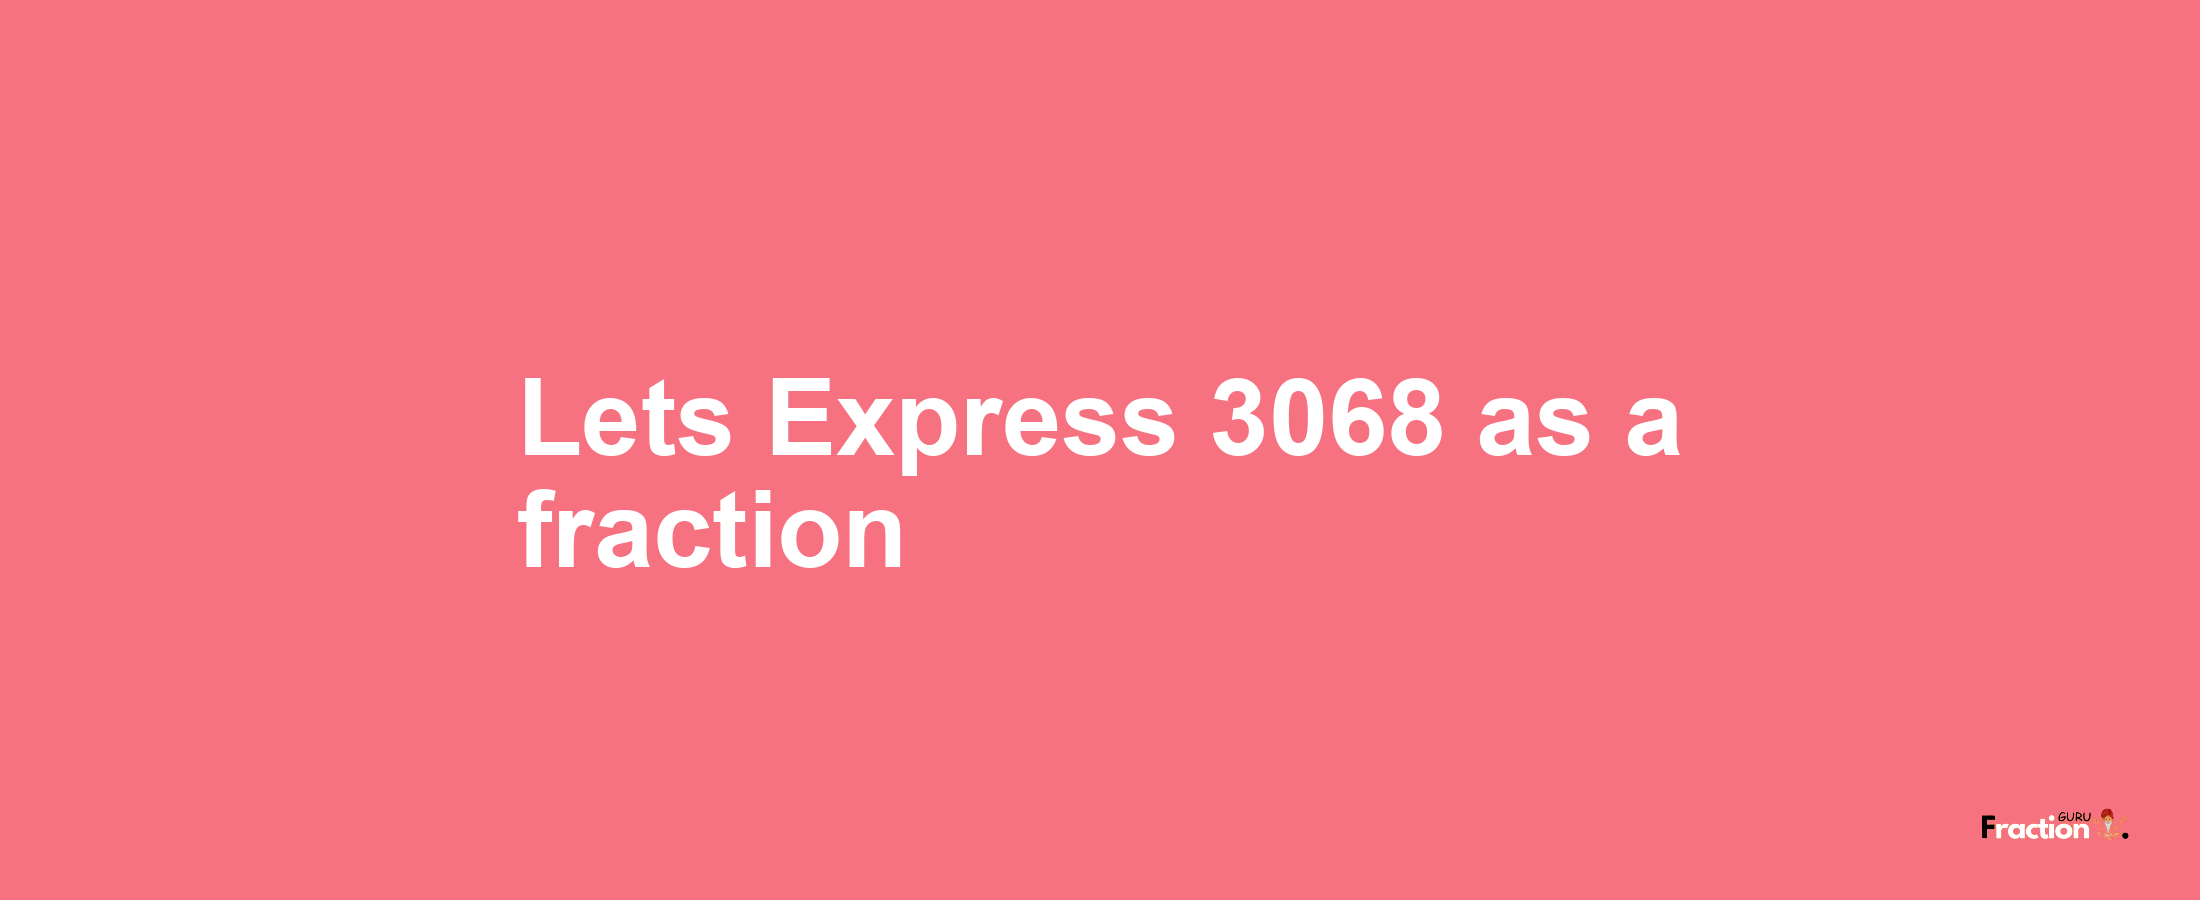 Lets Express 3068 as afraction